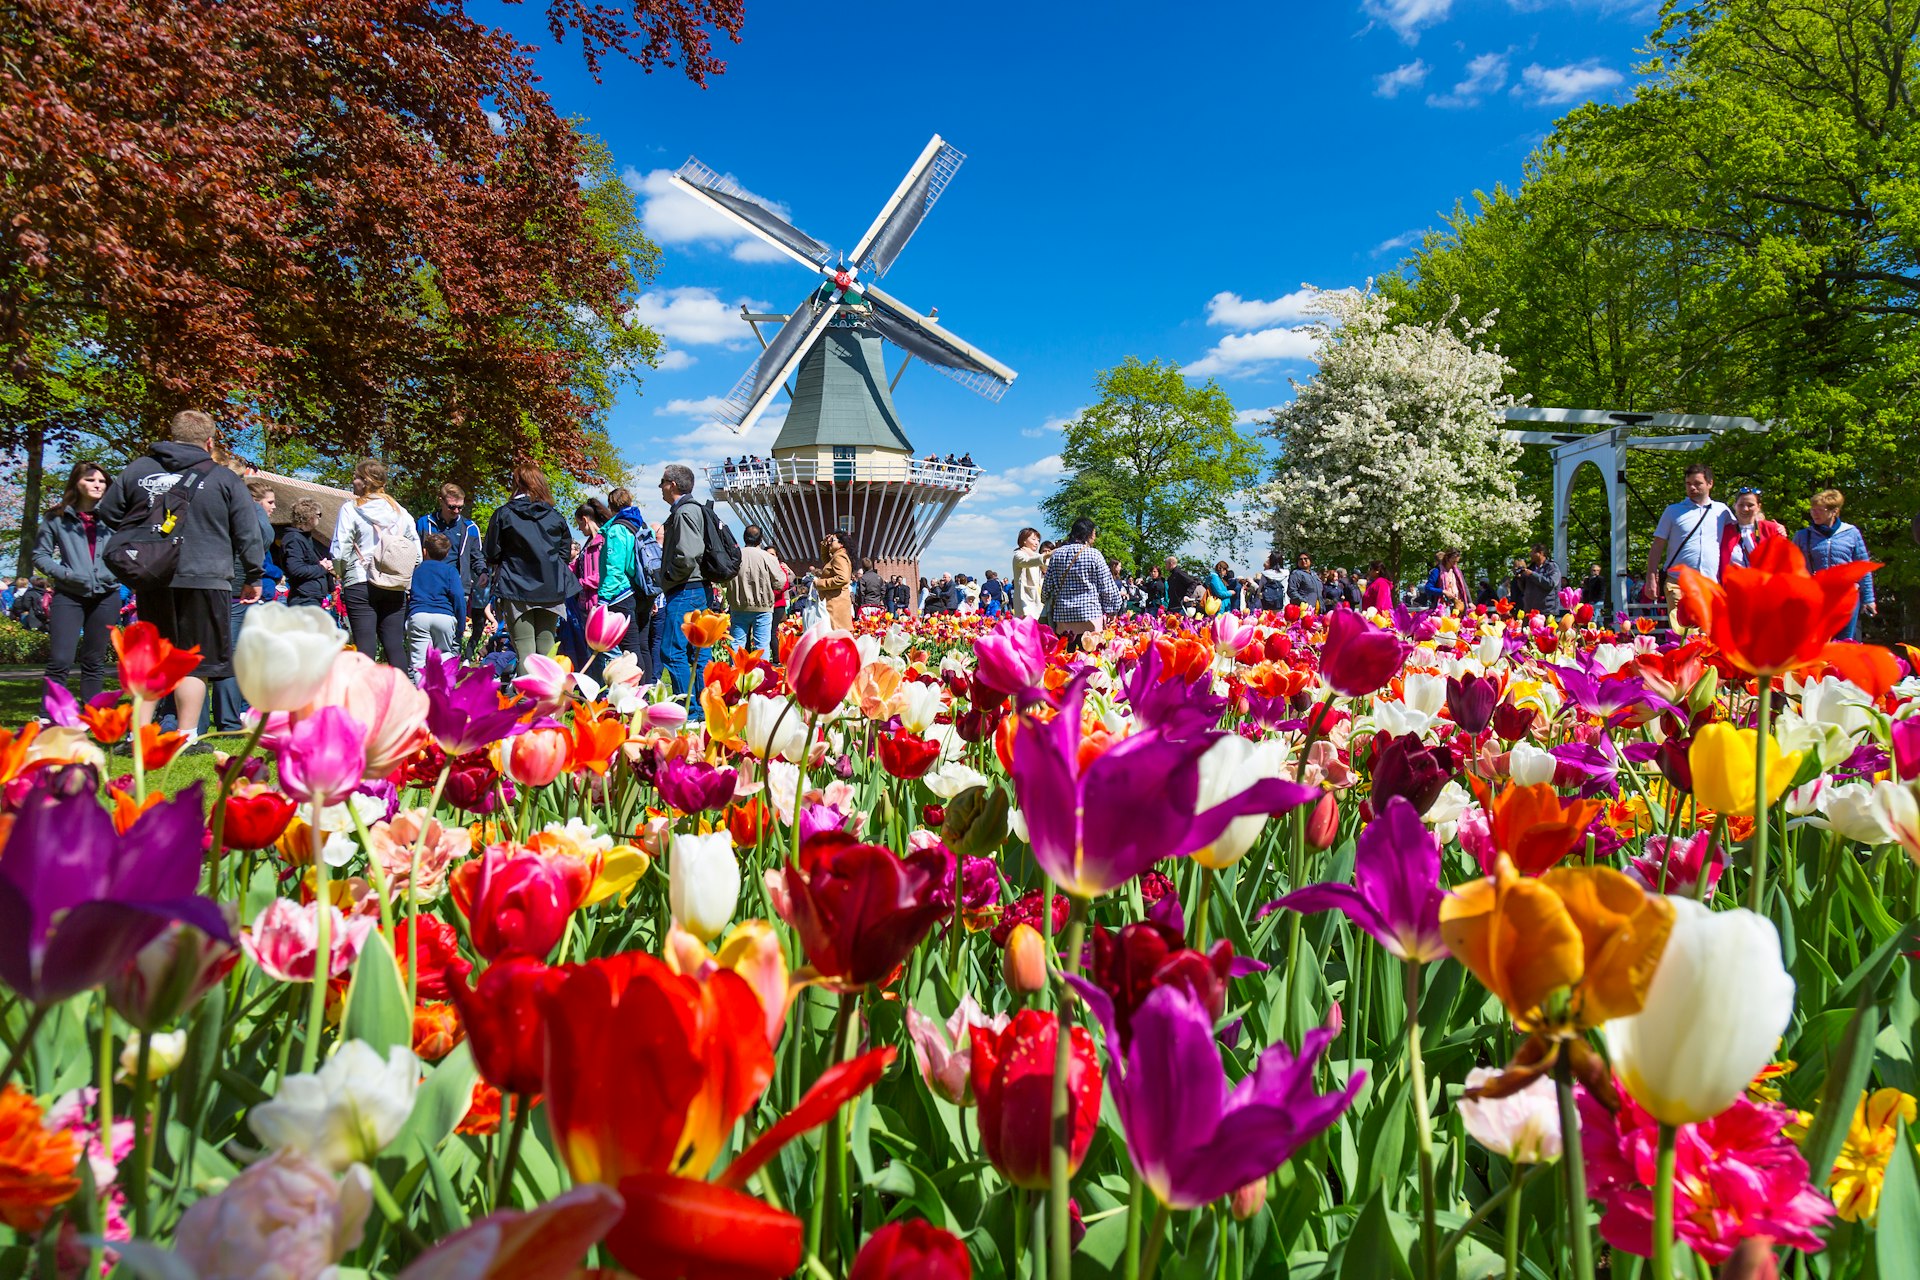 People wander around a garden packed with colorful tulips and dominated by a four-sailed windmill